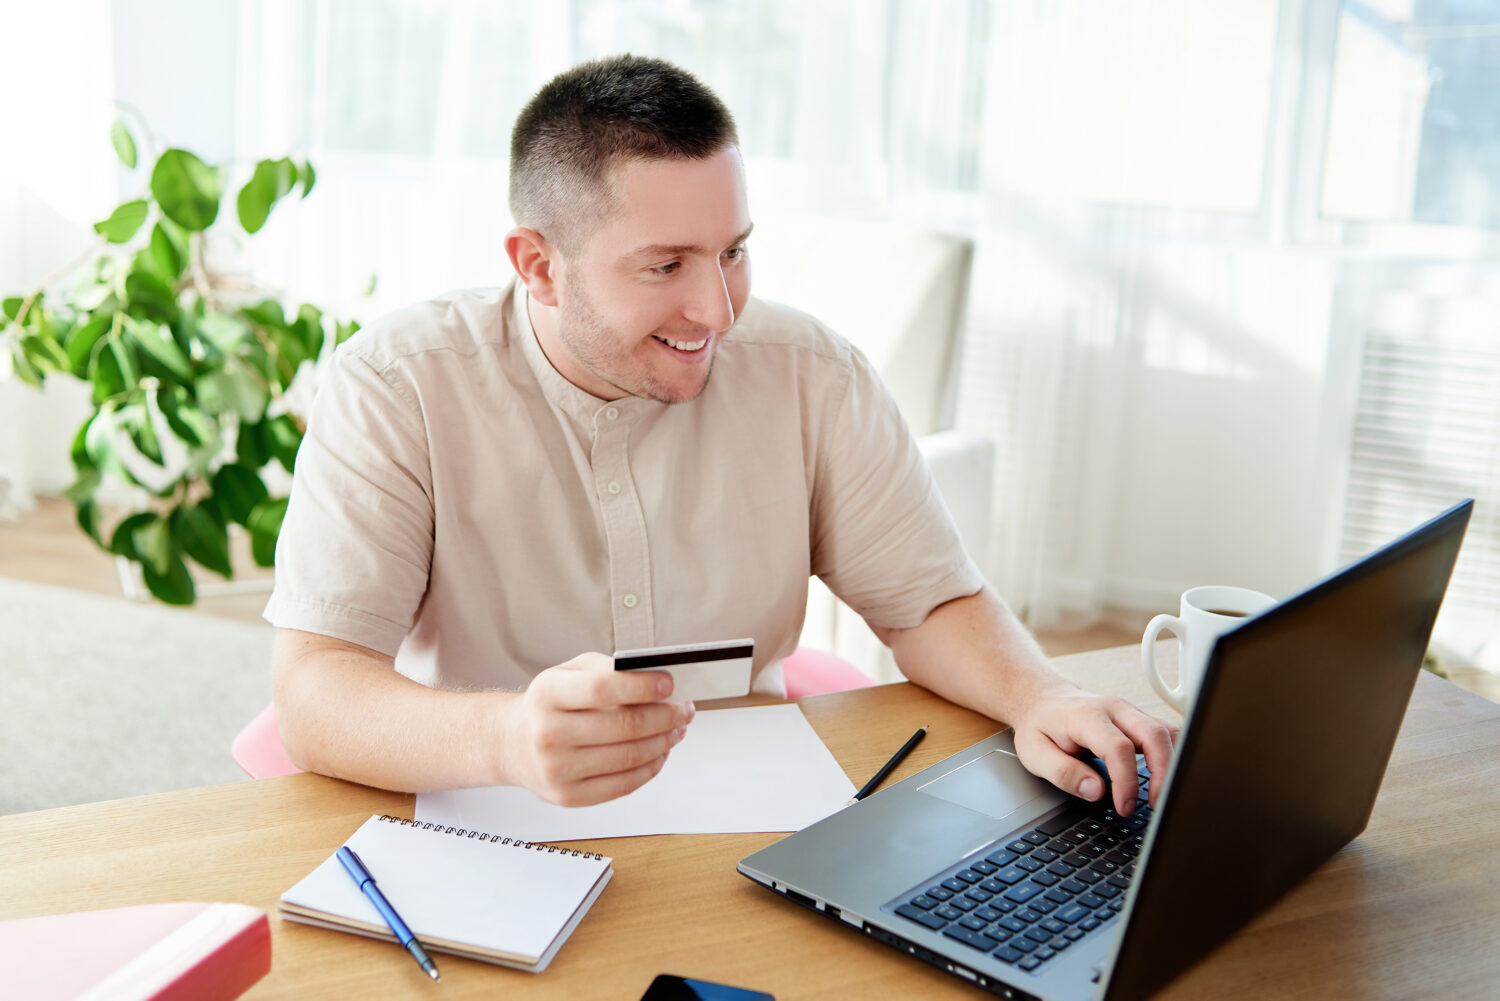 man looking at his laptop holding a credit card